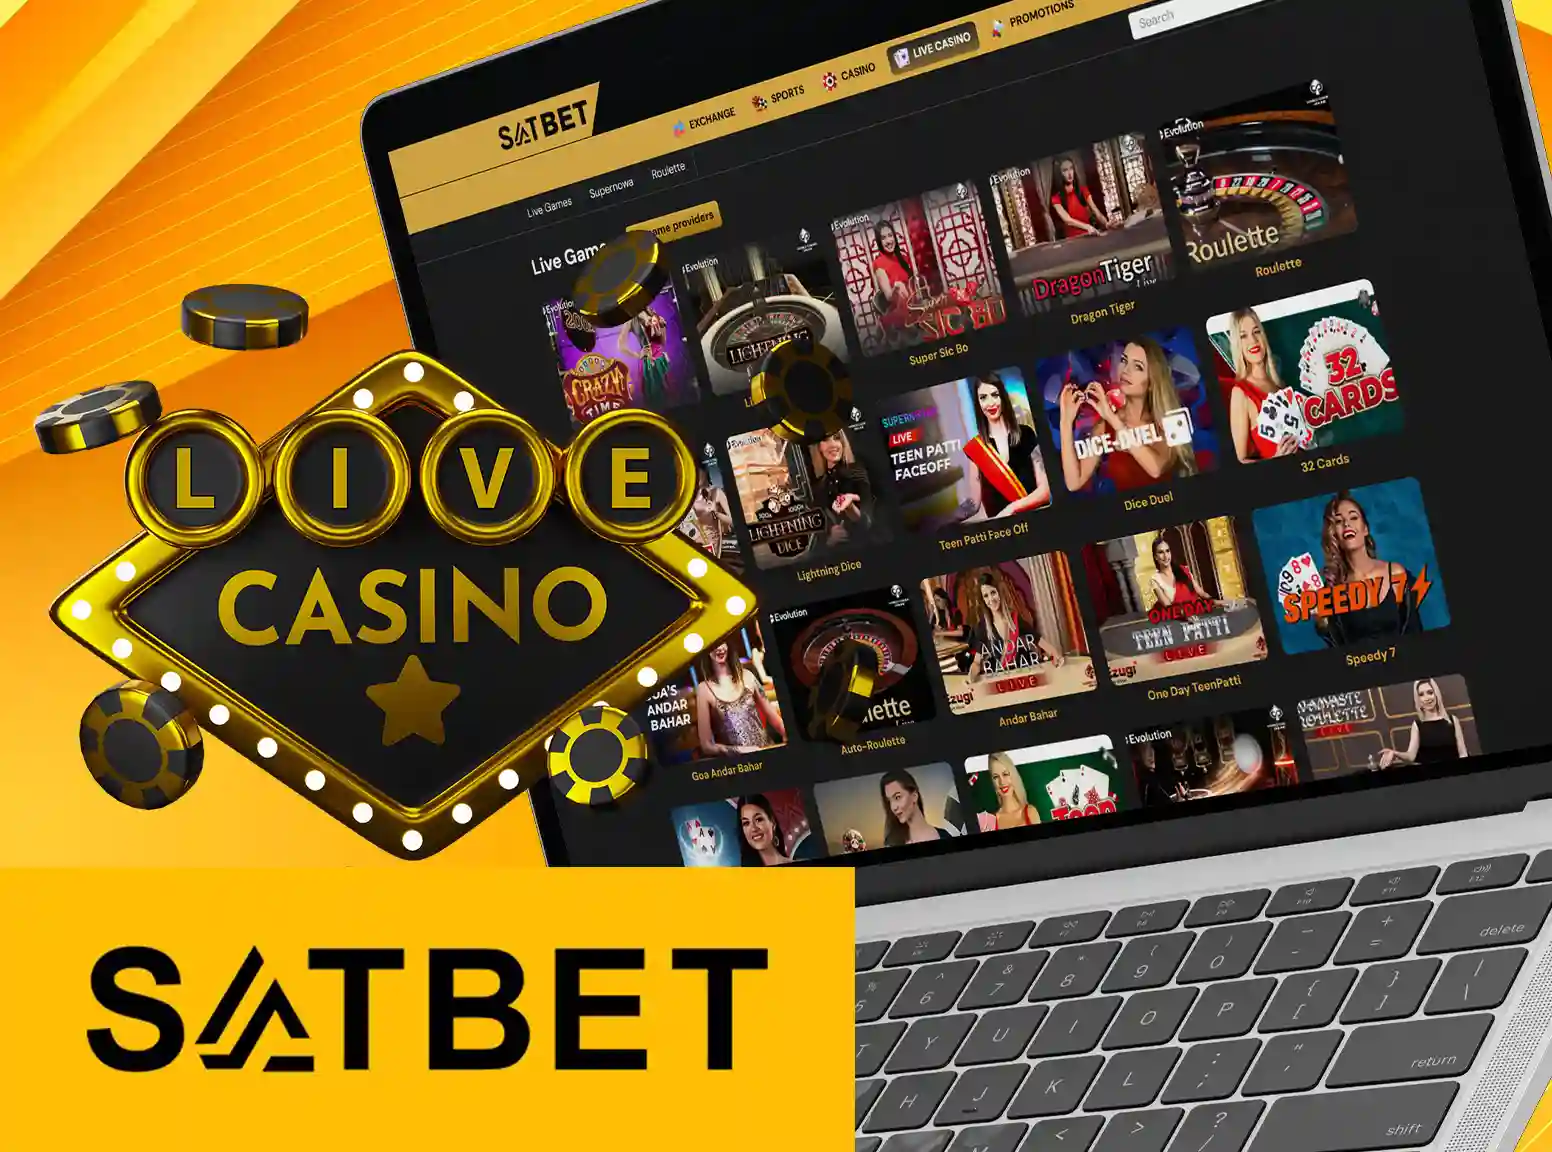 Satbet offers to play a variety of popular casino games in live casino mode.